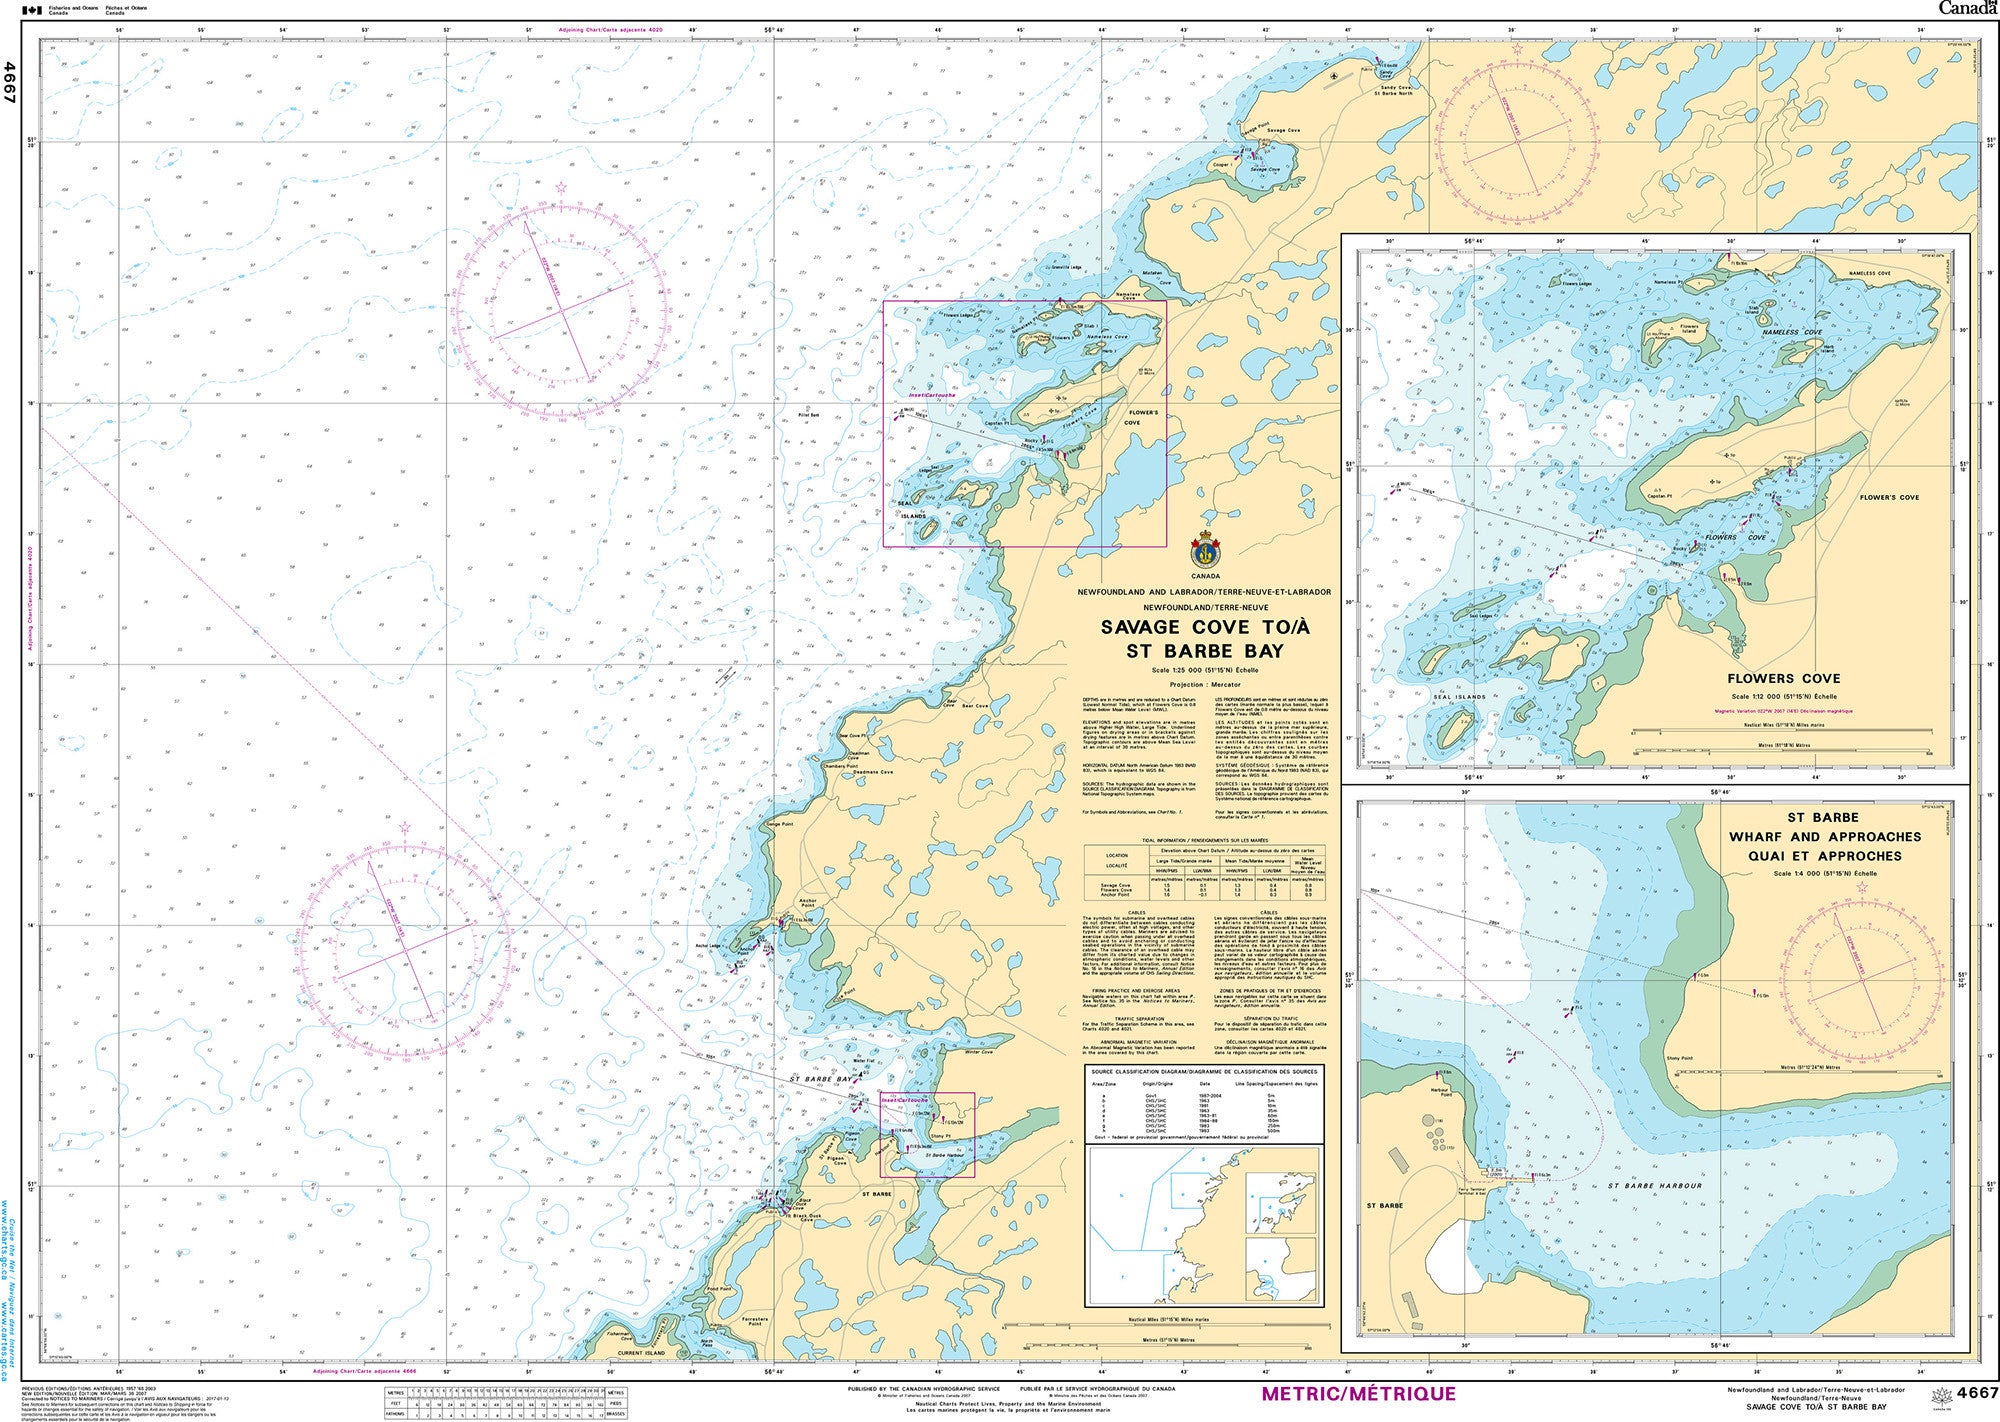 Canadian Hydrographic Service Nautical Chart CHS4667: Savage Cove to/à St. Barbe Bay